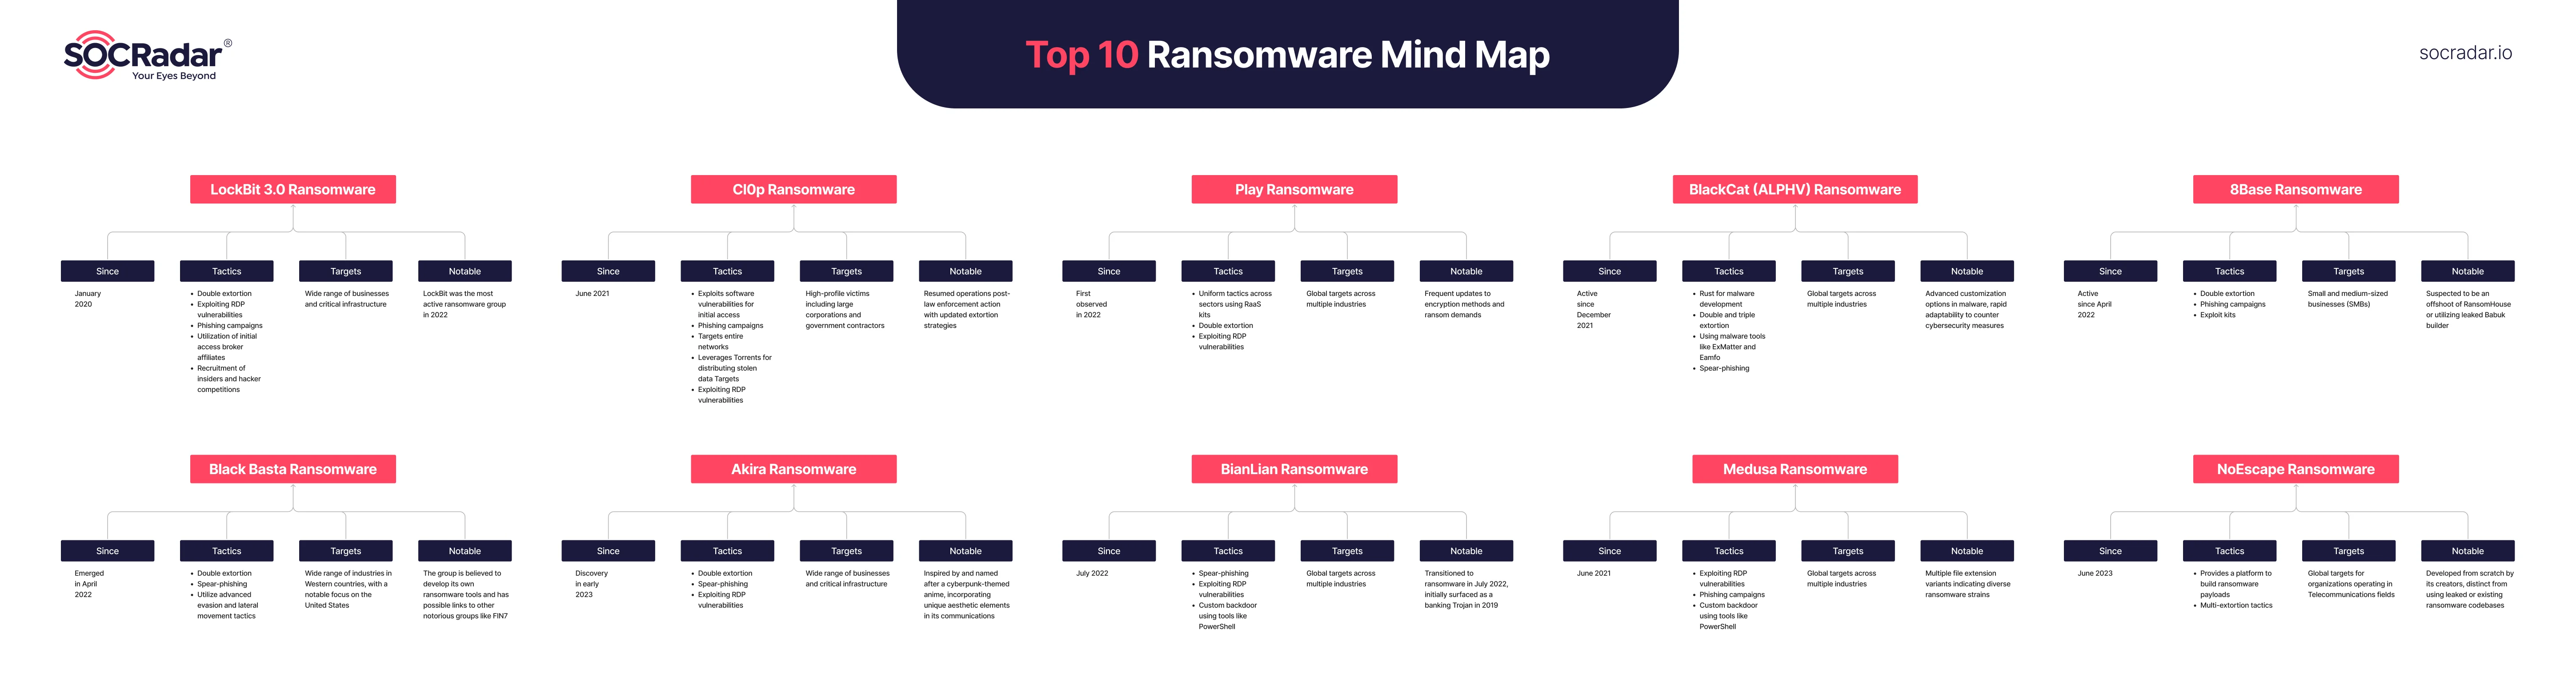 Top 10 Ransomware Mind Map